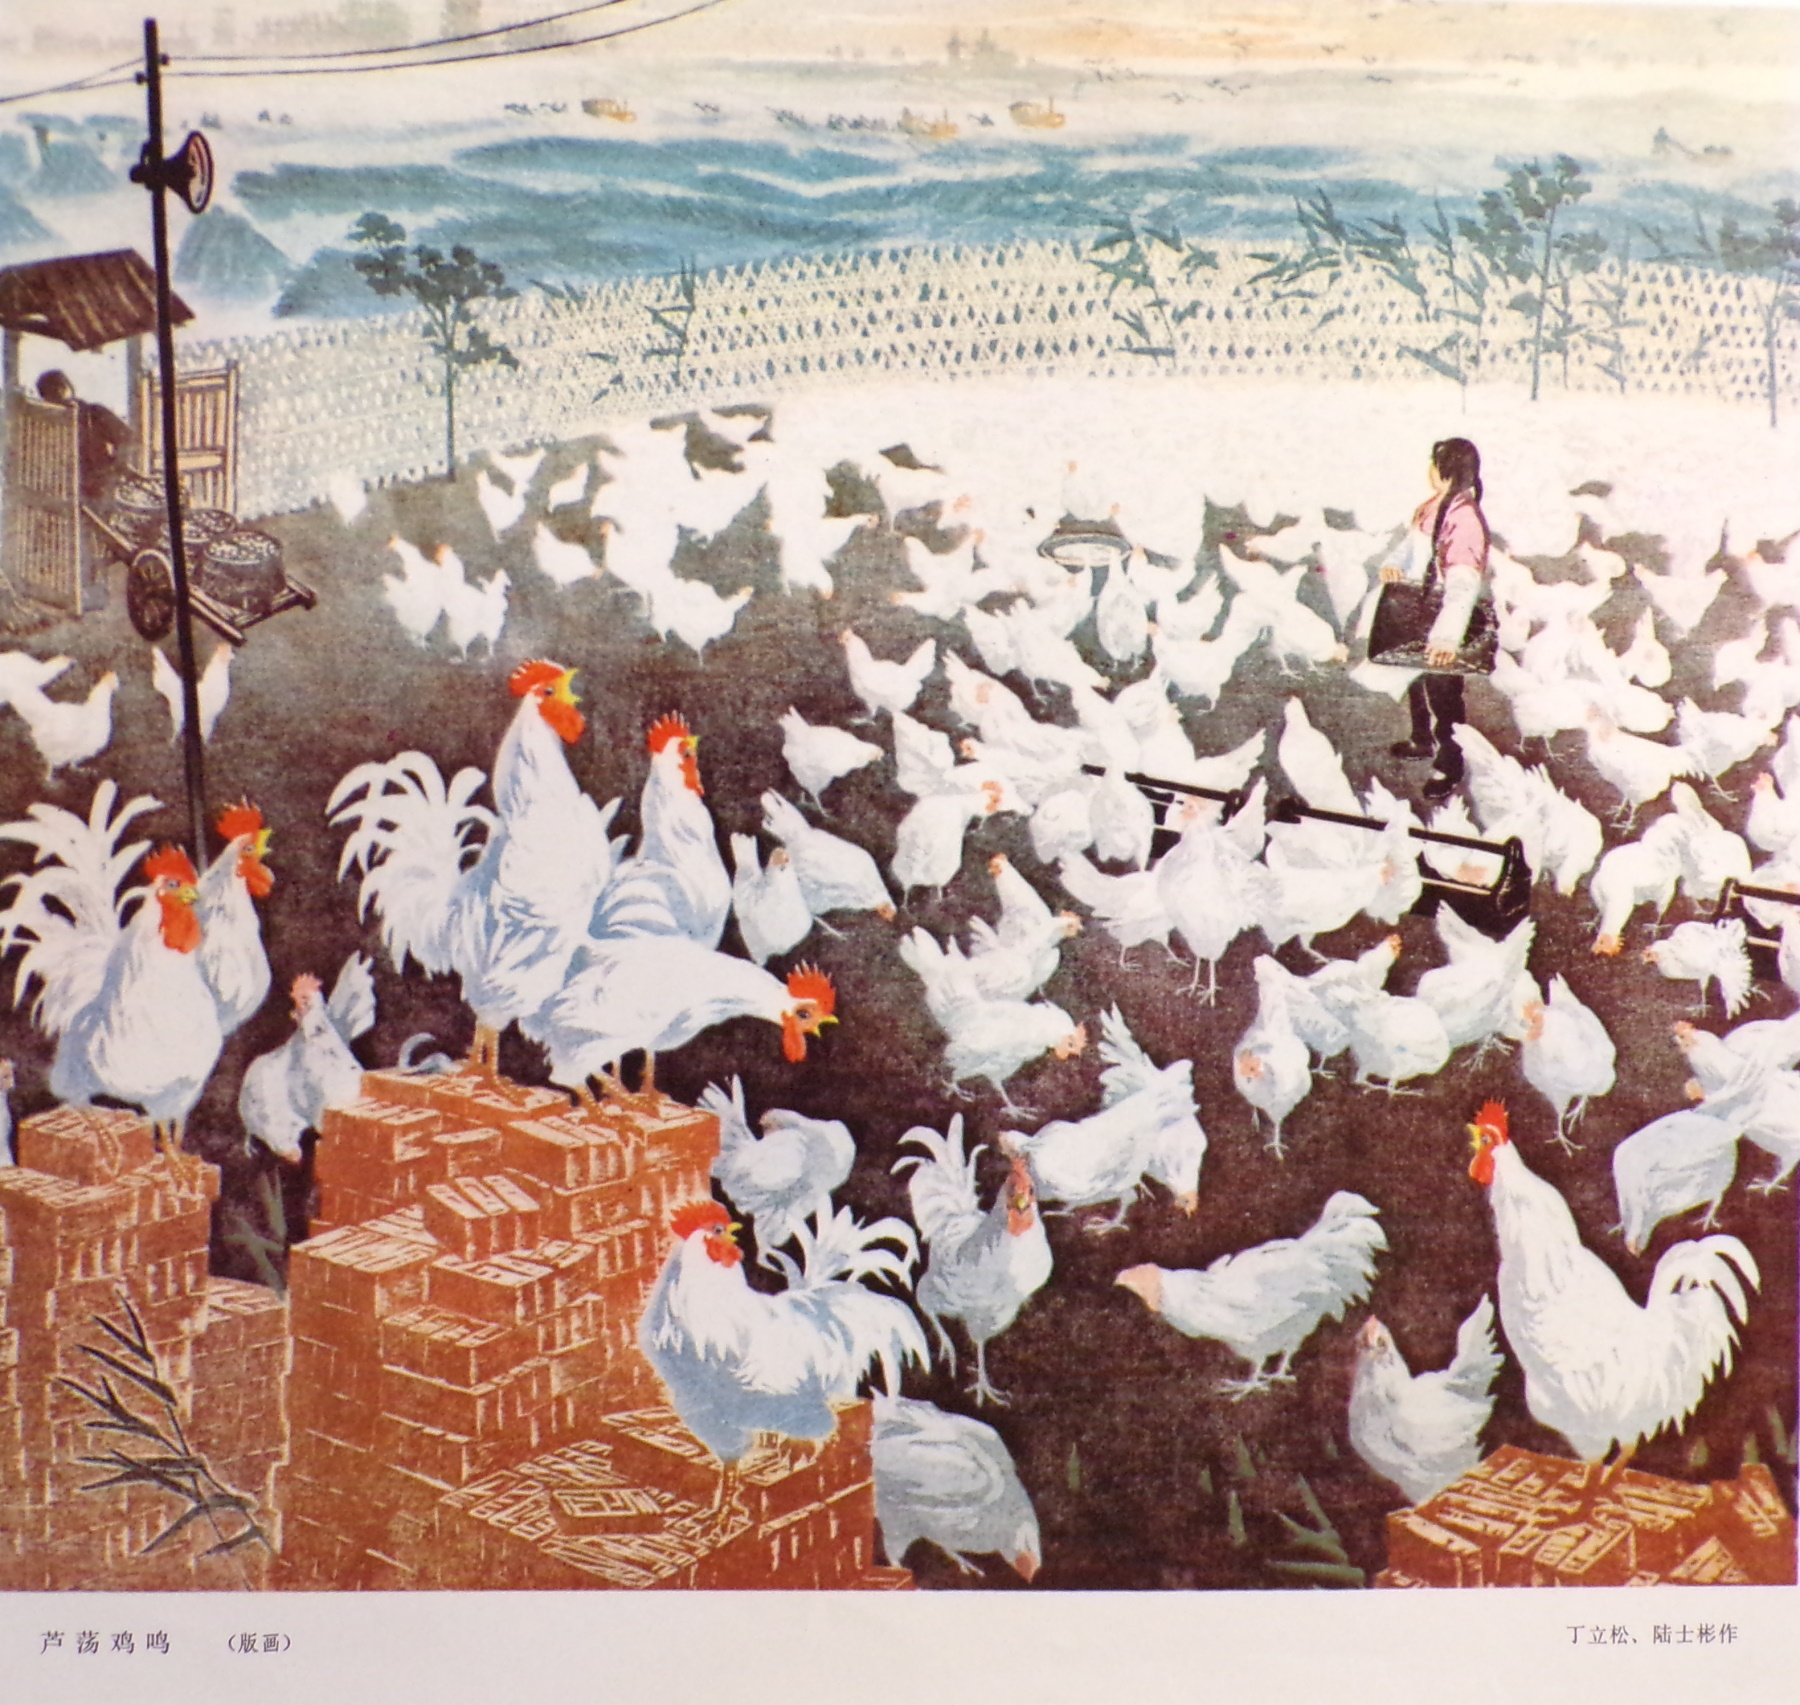 Chickens Clucking by the Reed Pond 芦汤鸡鸣